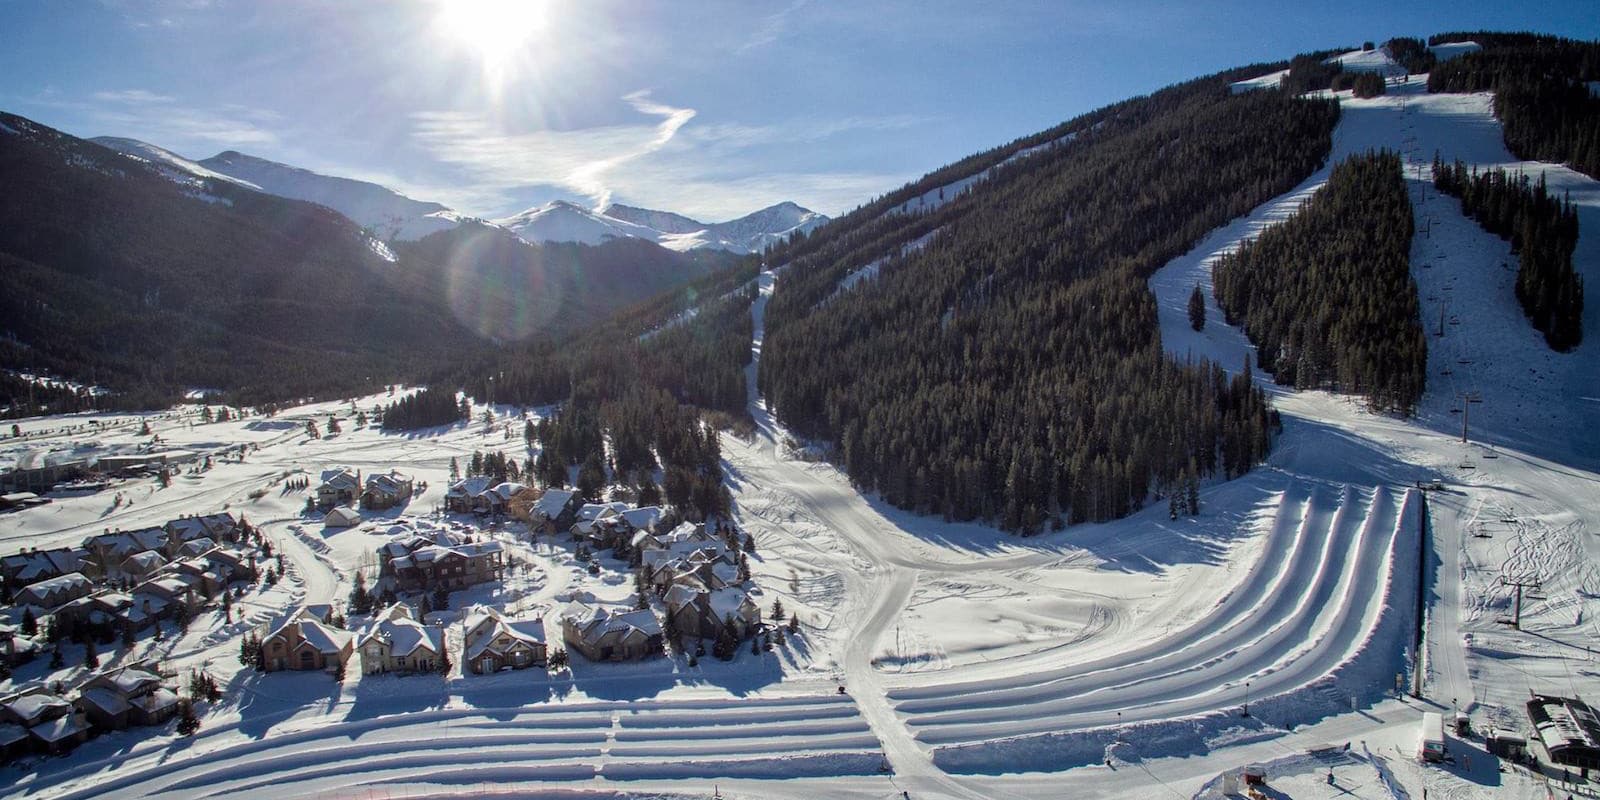 Image of the tubing hill in Copper Mountain, Colorado